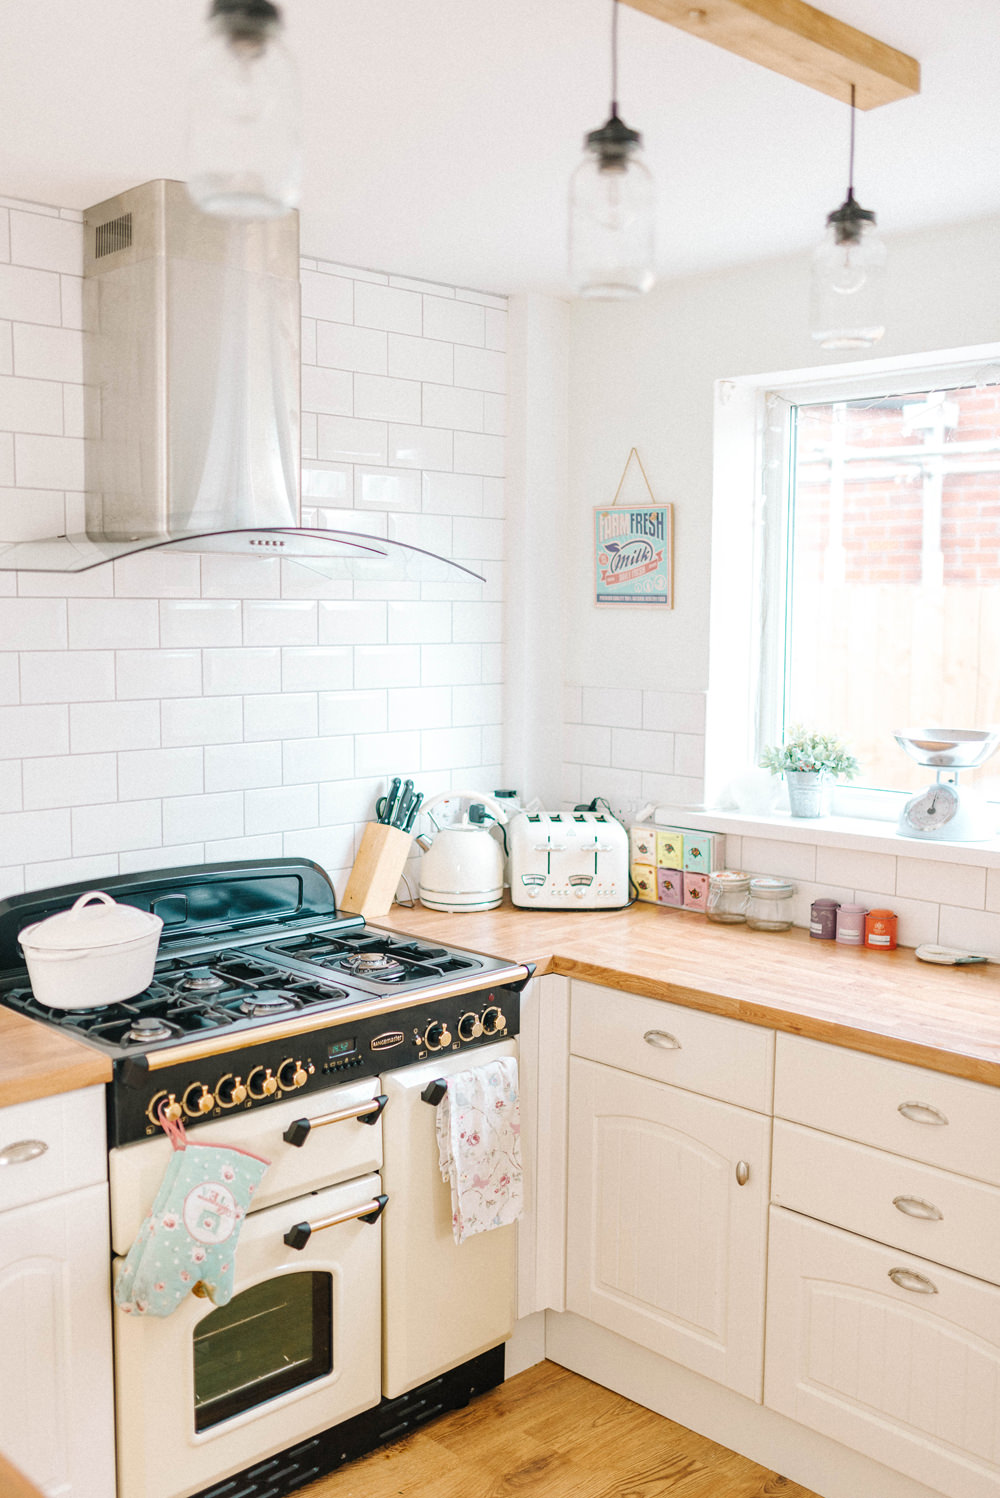 Classic kitchen units and wooden worktops